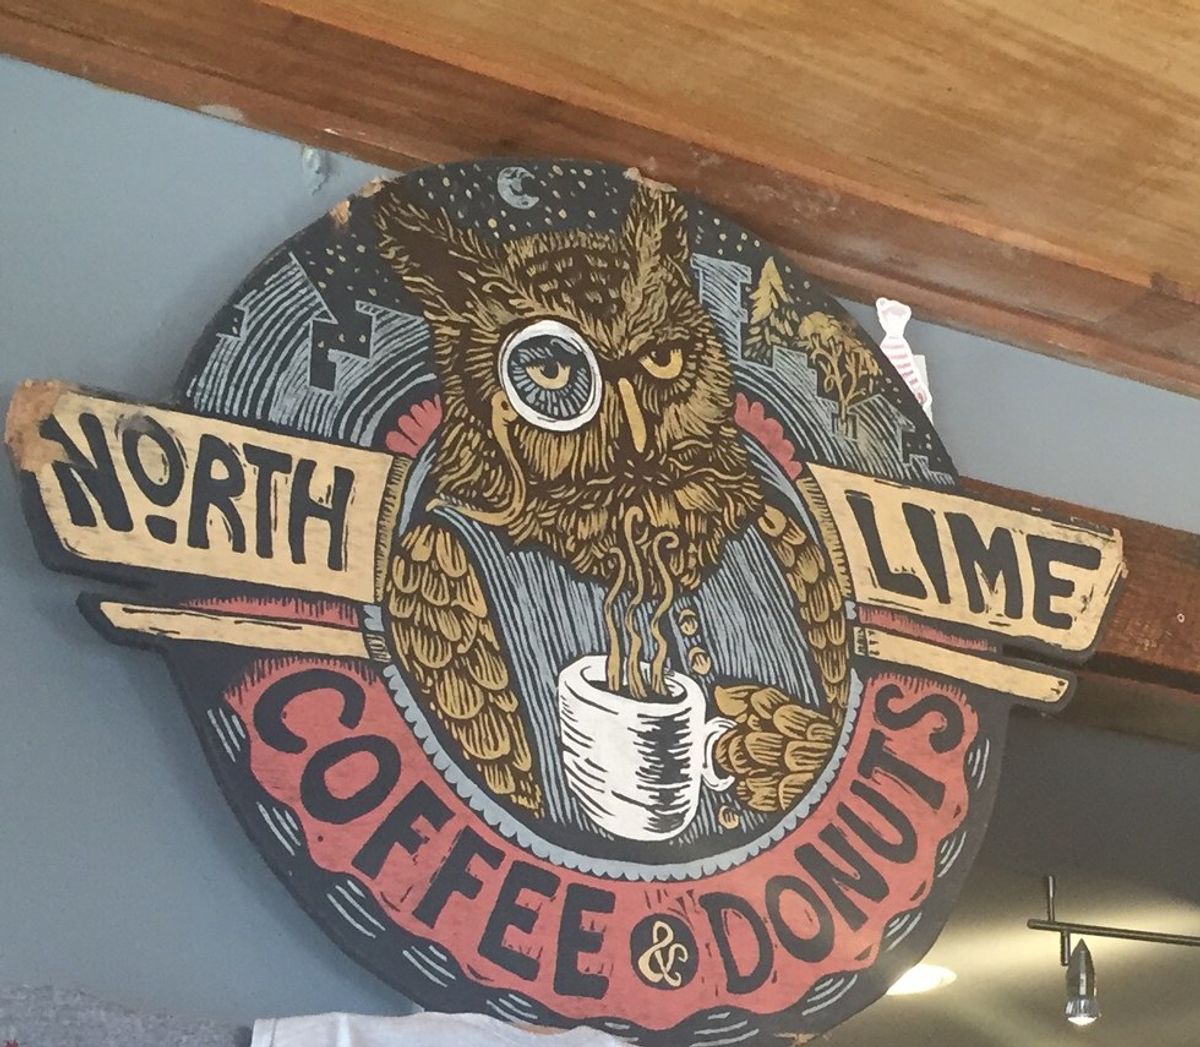 Spotlight on: North Lime Coffee & Donuts